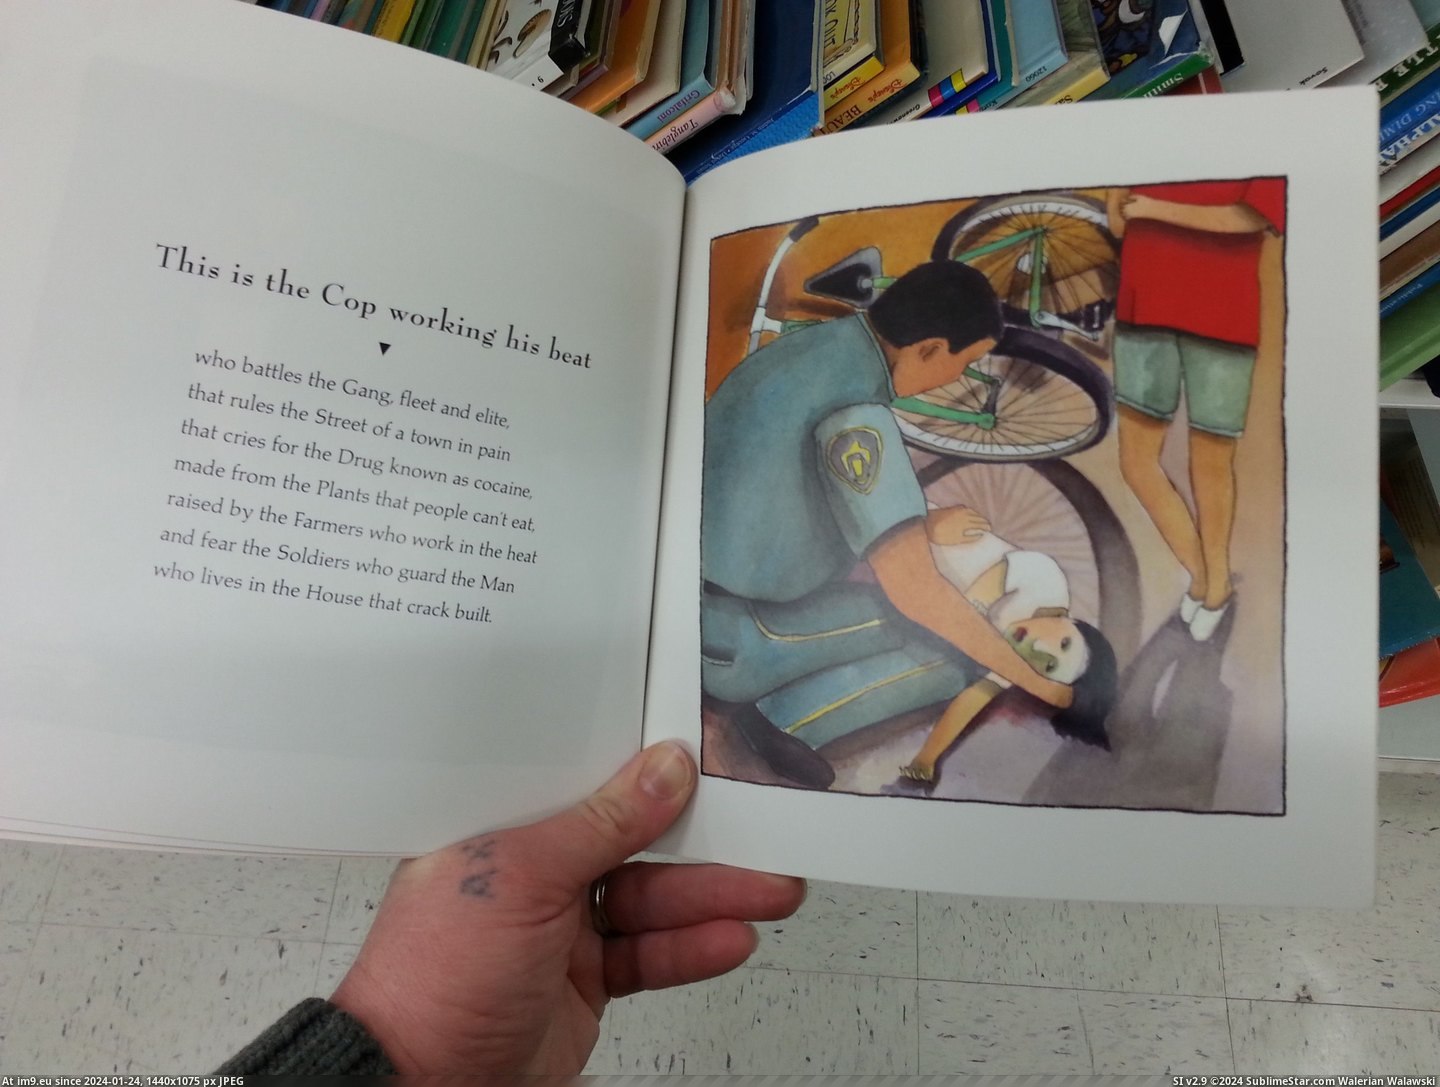 #Wtf #Store #Thrift #Crack #Book #Children [Wtf] Found this children's book about crack at a thrift store today 2 Pic. (Image of album My r/WTF favs))